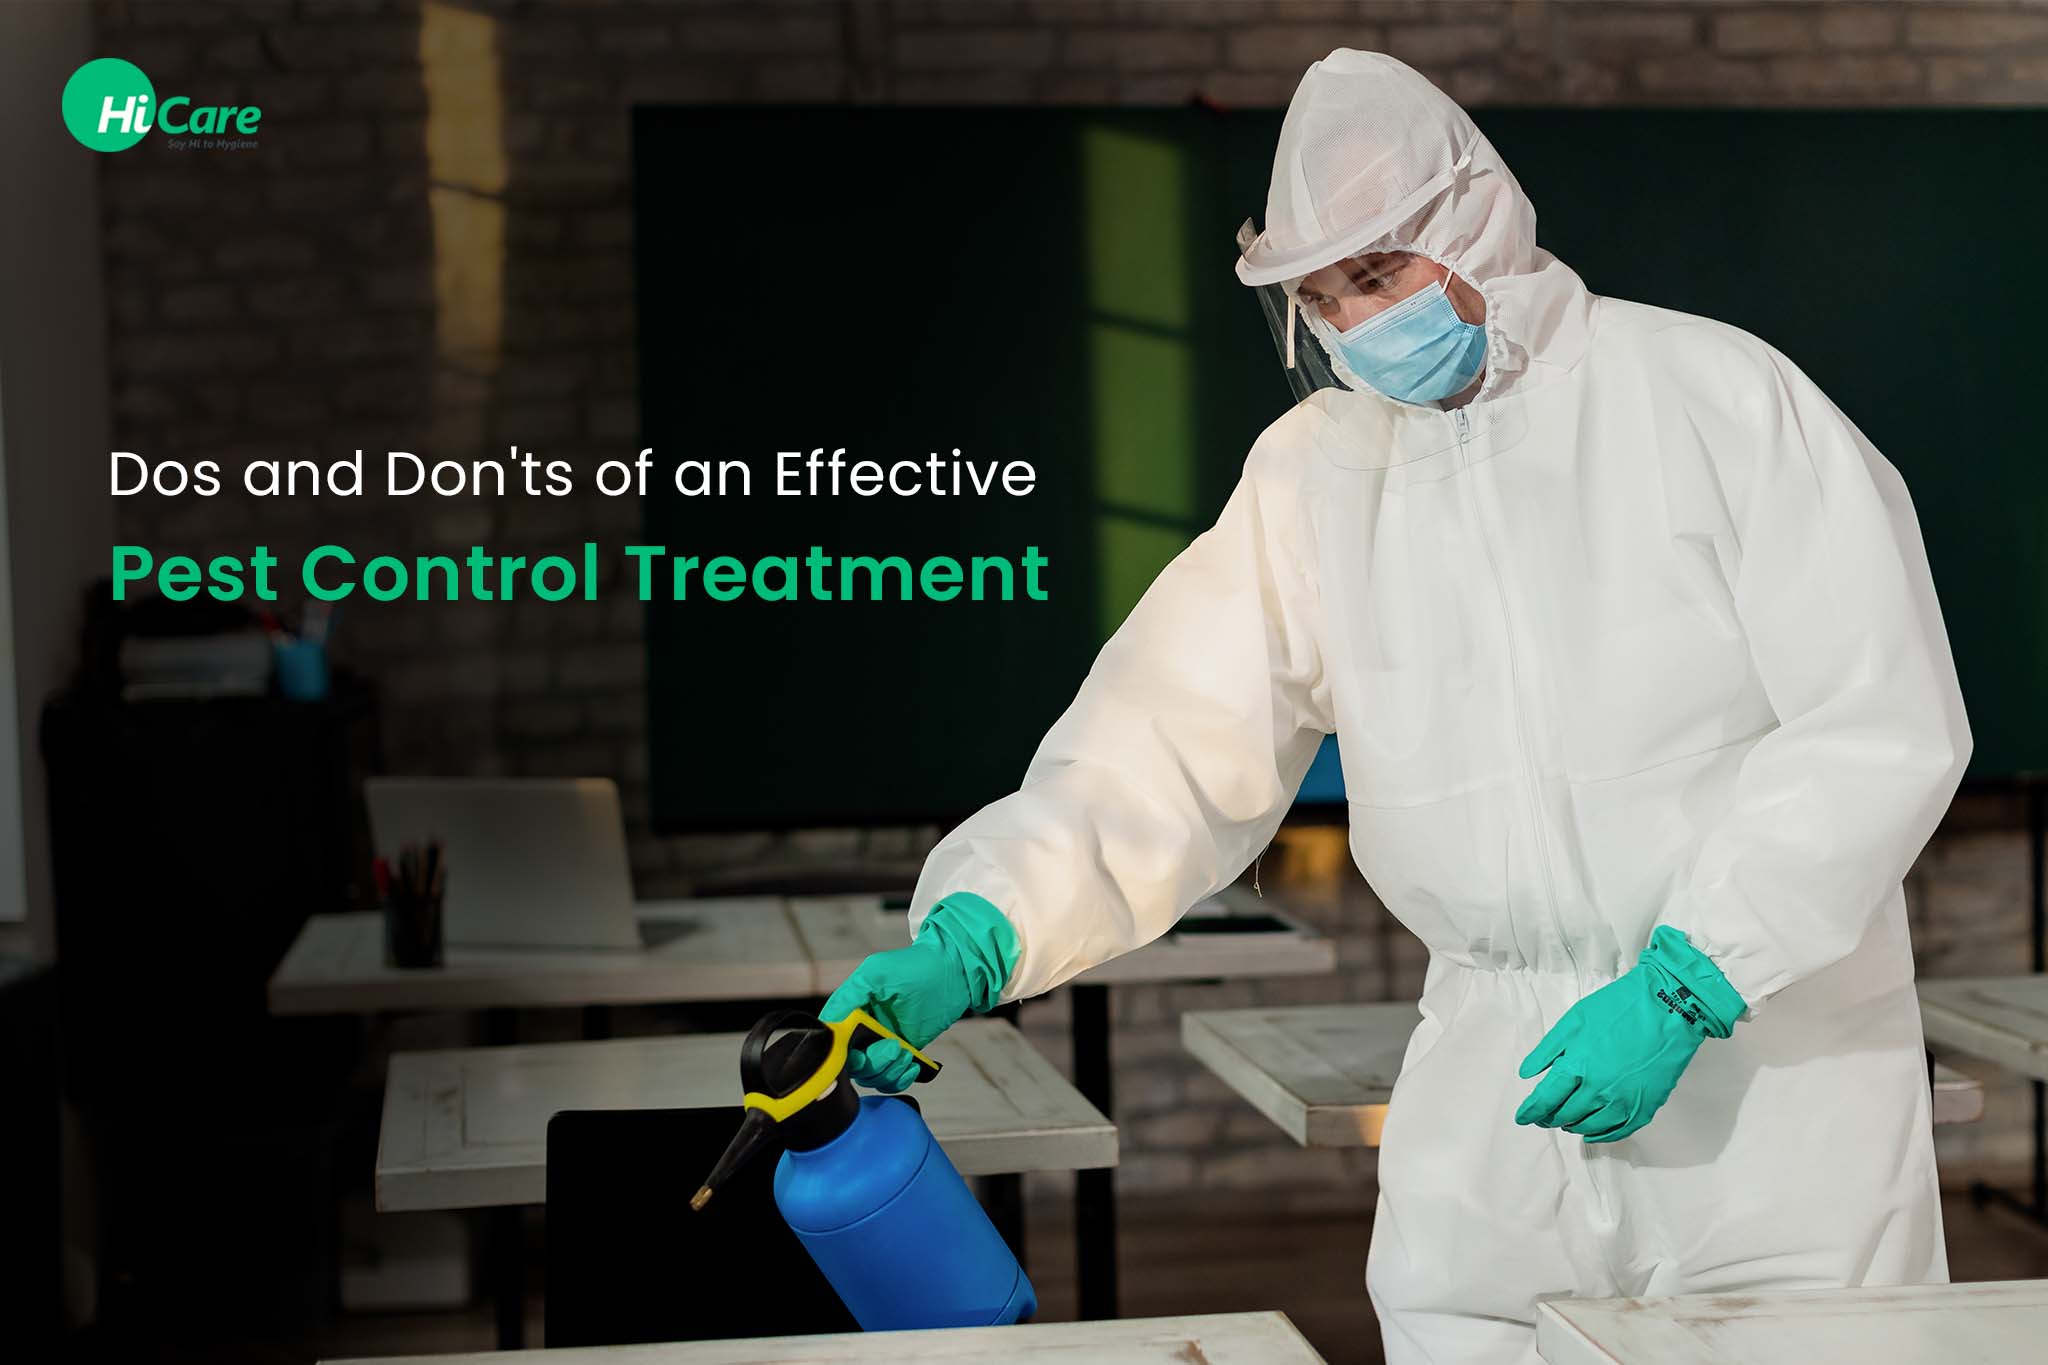 5 Dos and Don’ts of an Effective Pest Control Treatment